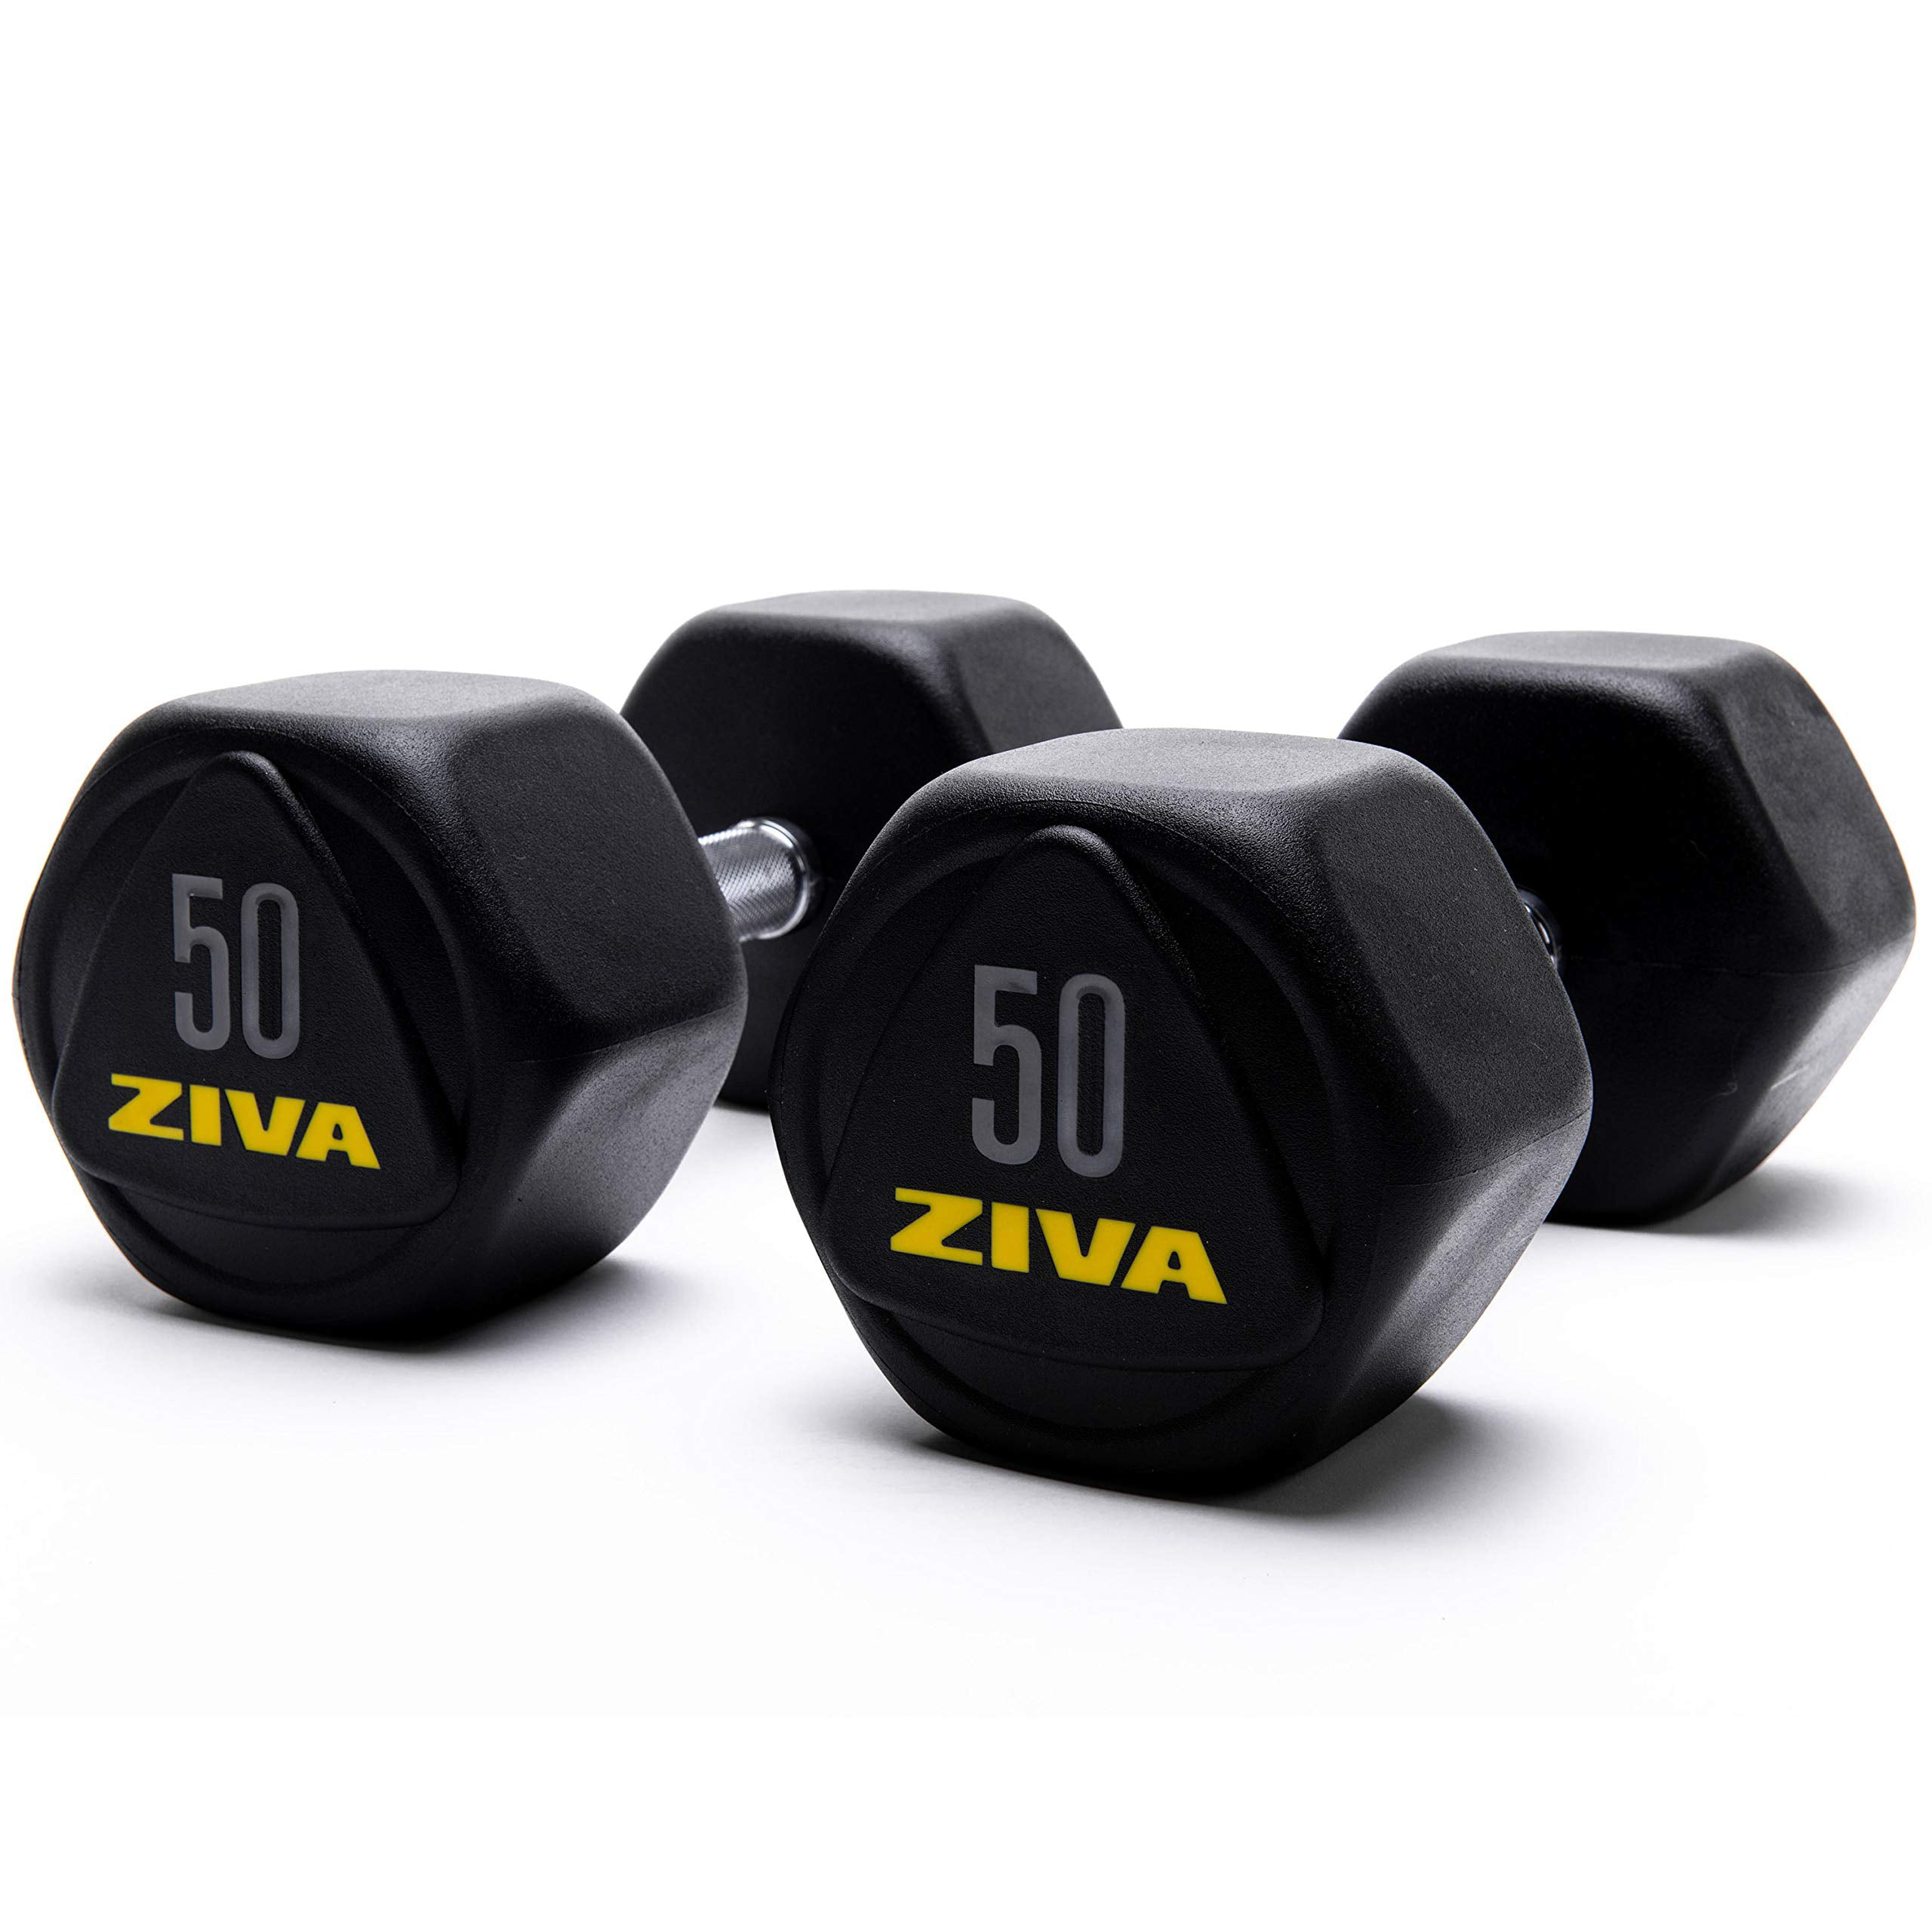 ZIVA Premium Rubber Solid Steel Dumbbell Set Commerical Grade Durable Urethane Rubber Designed for Rigourous Exercise Strength Training Avail 2-20lb Pairs, or a 3pc-Dumbbell Wellness Kit 